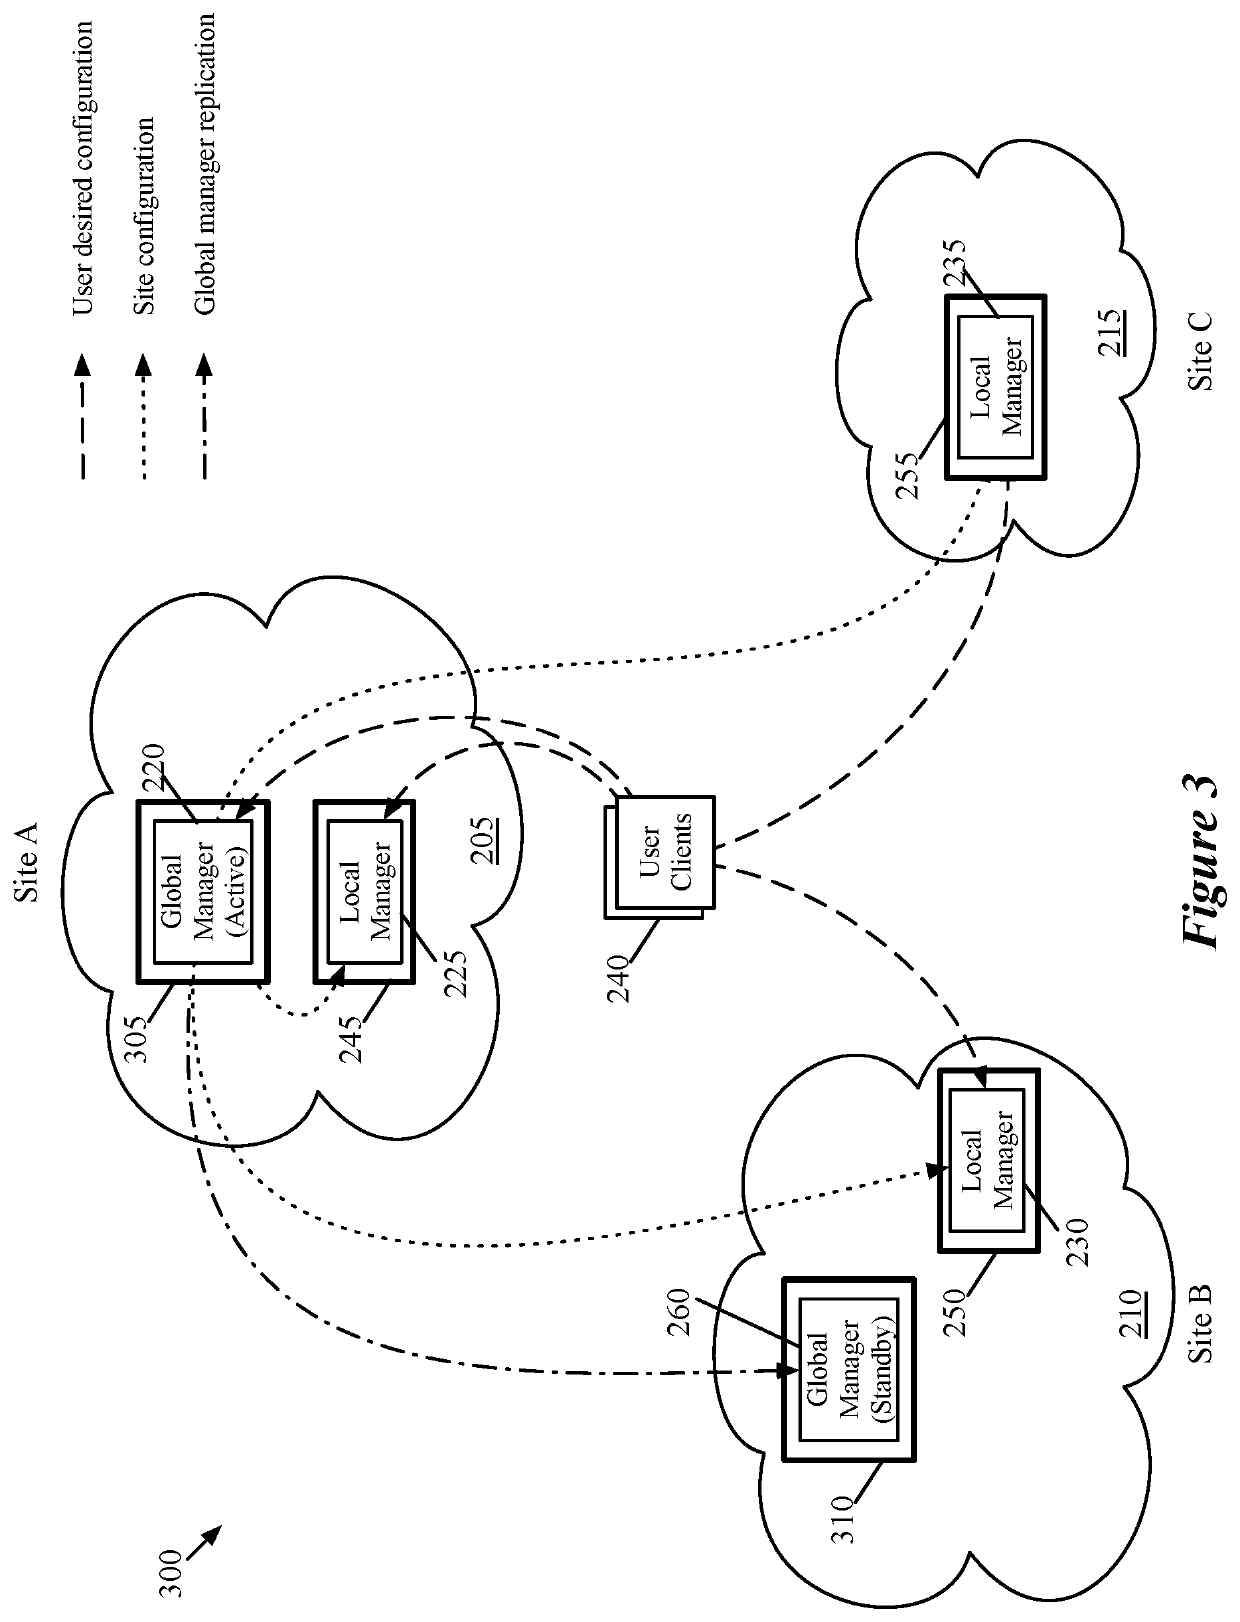 Network management system for federated multi-site logical network